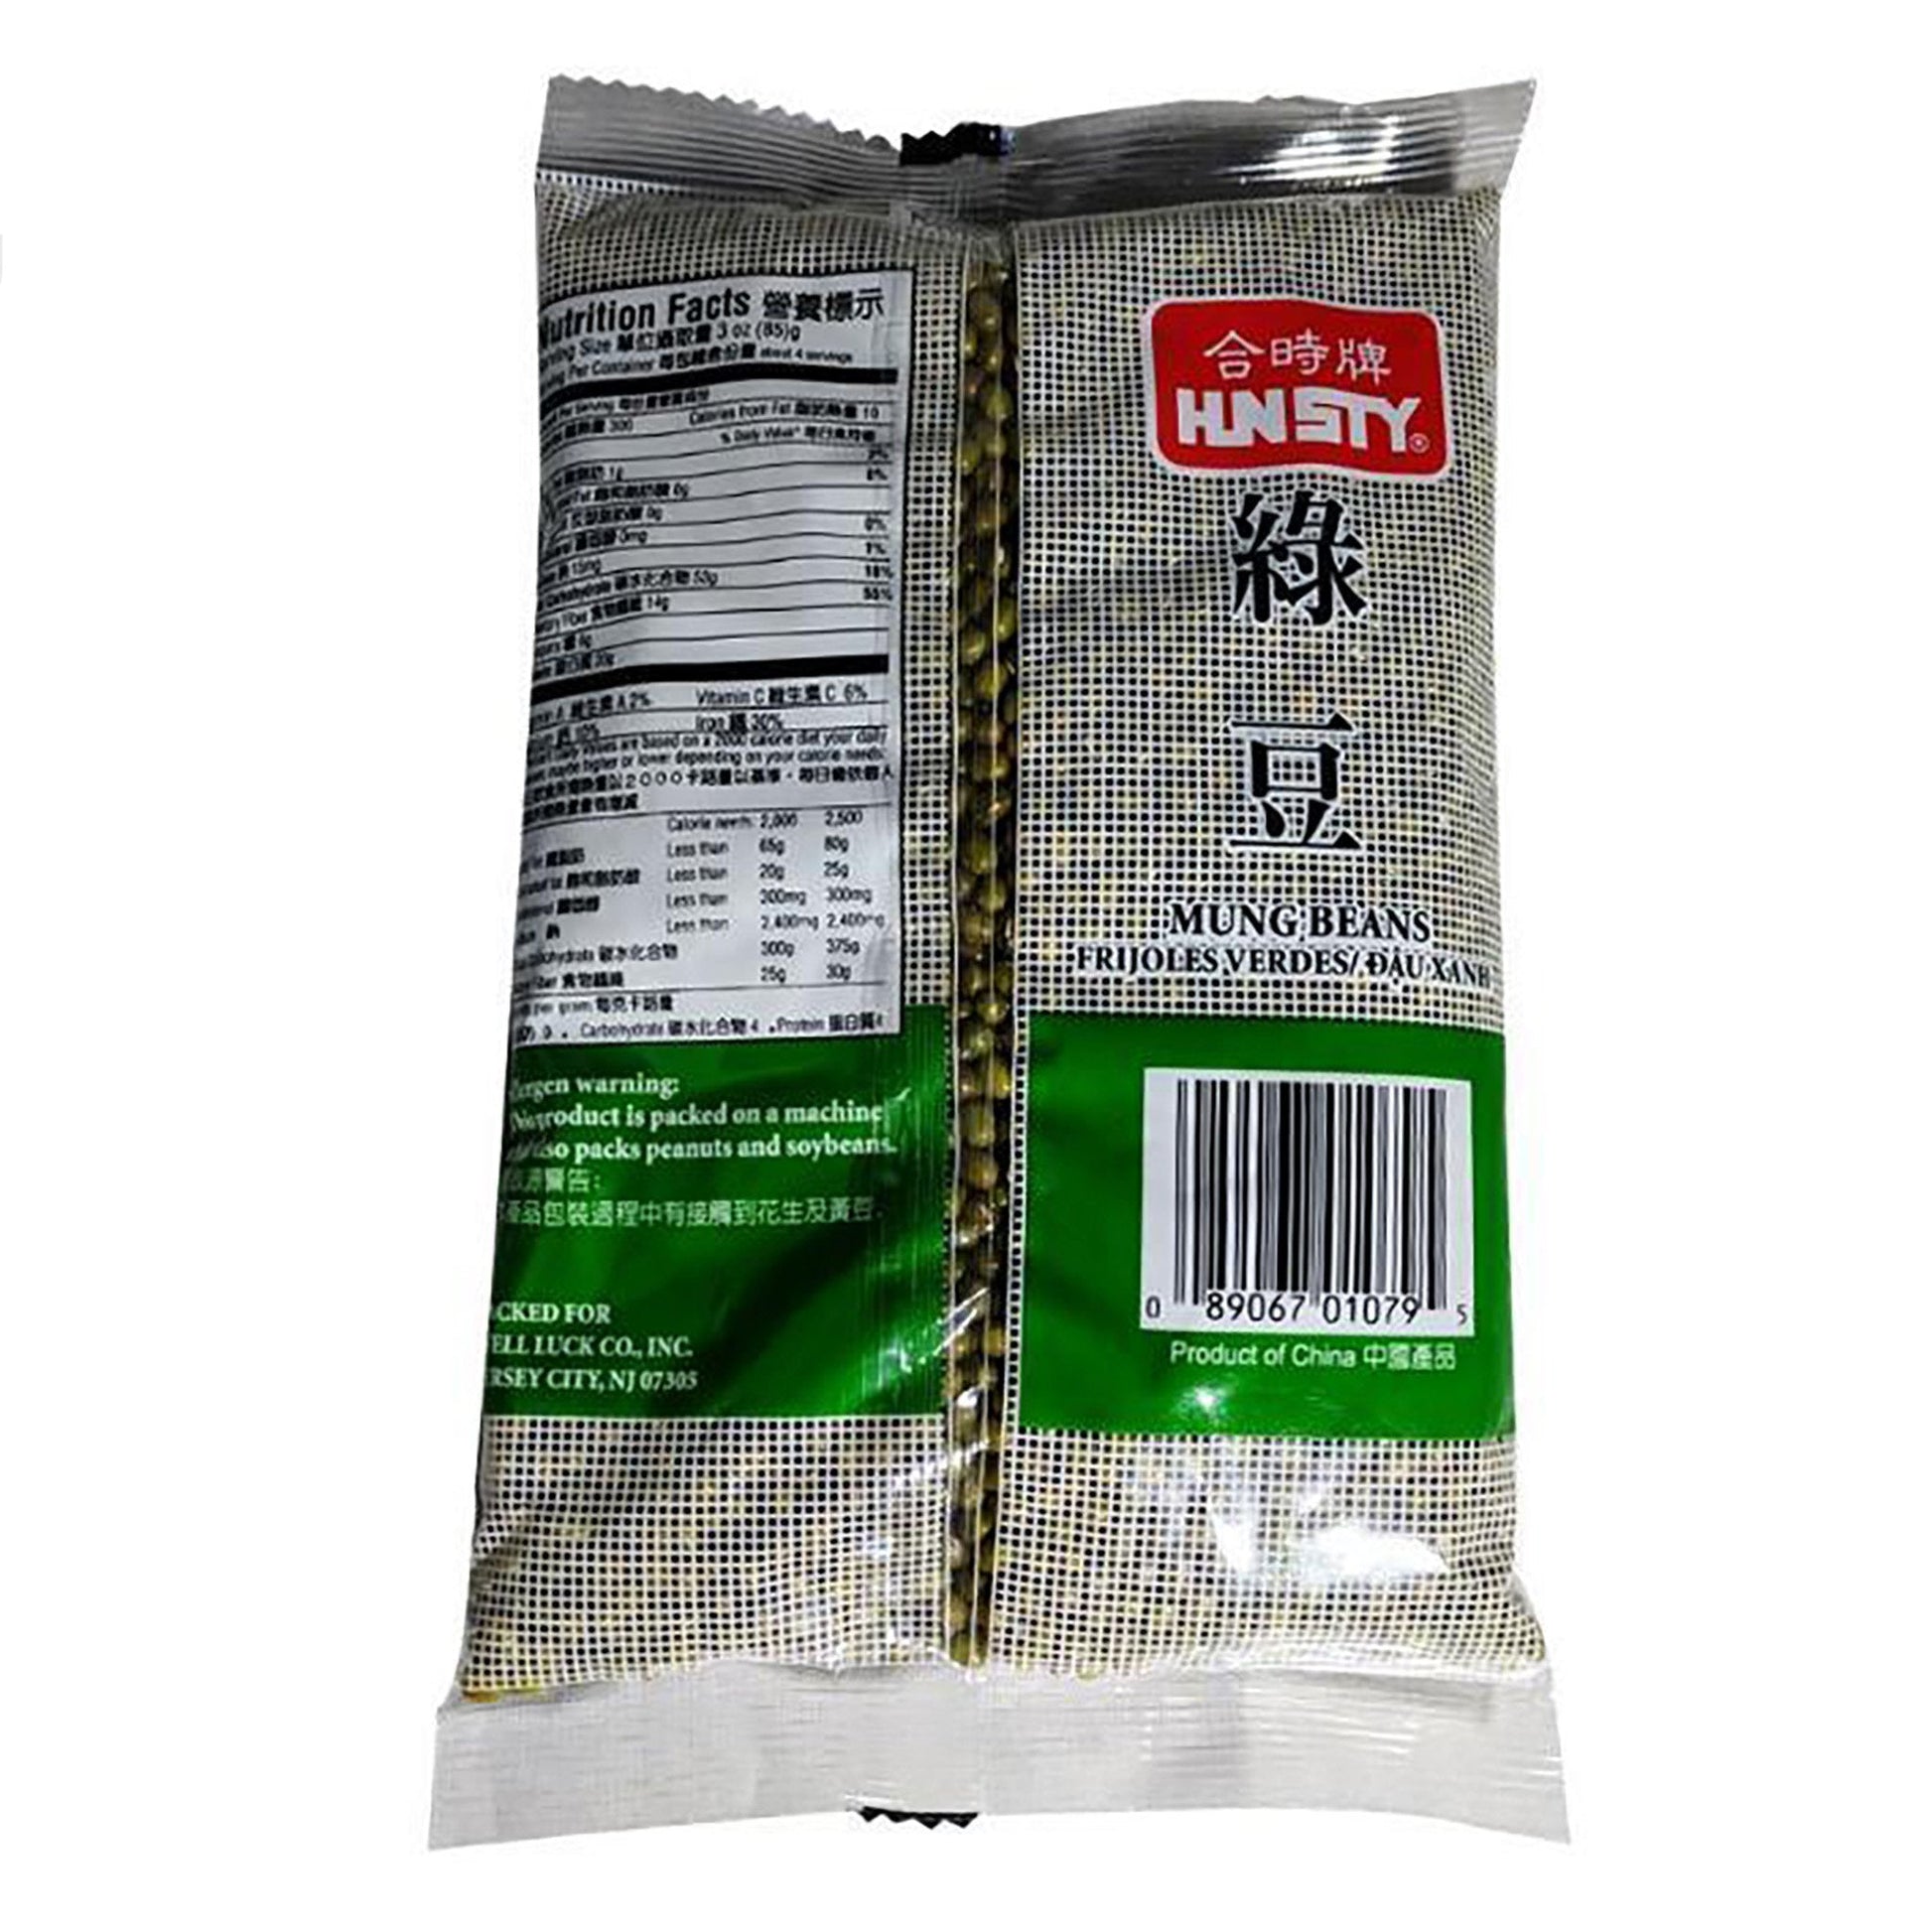 Back graphic image of Hunsty Mung Beans 12oz